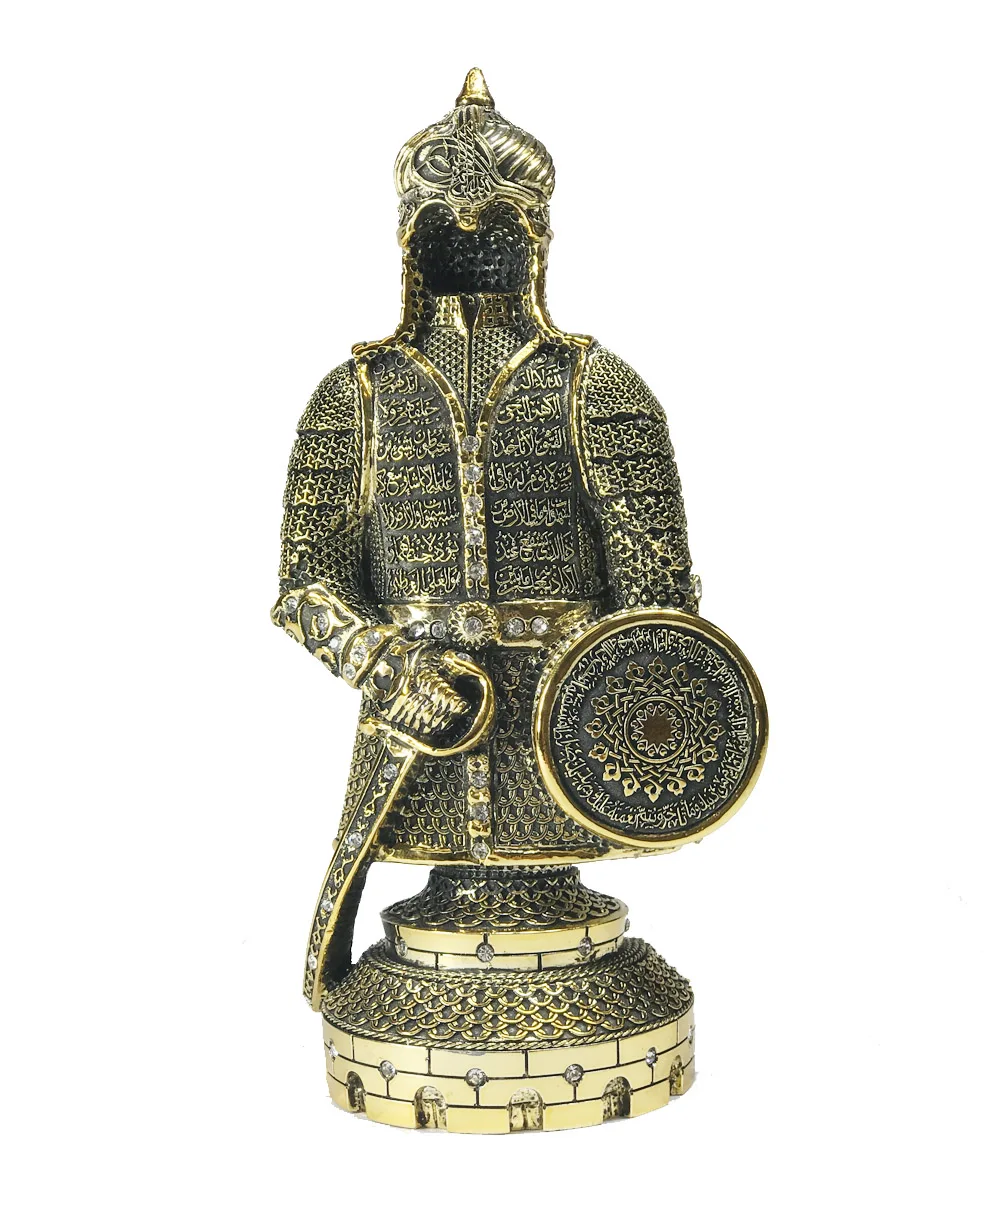 

GREAT GIFT FOR YOUR DECOR OFFICE HOME Elegant Ayetel-Kursili Armor Trinket Mini Size WITH AWESOME COLORS FREE SHIPPING